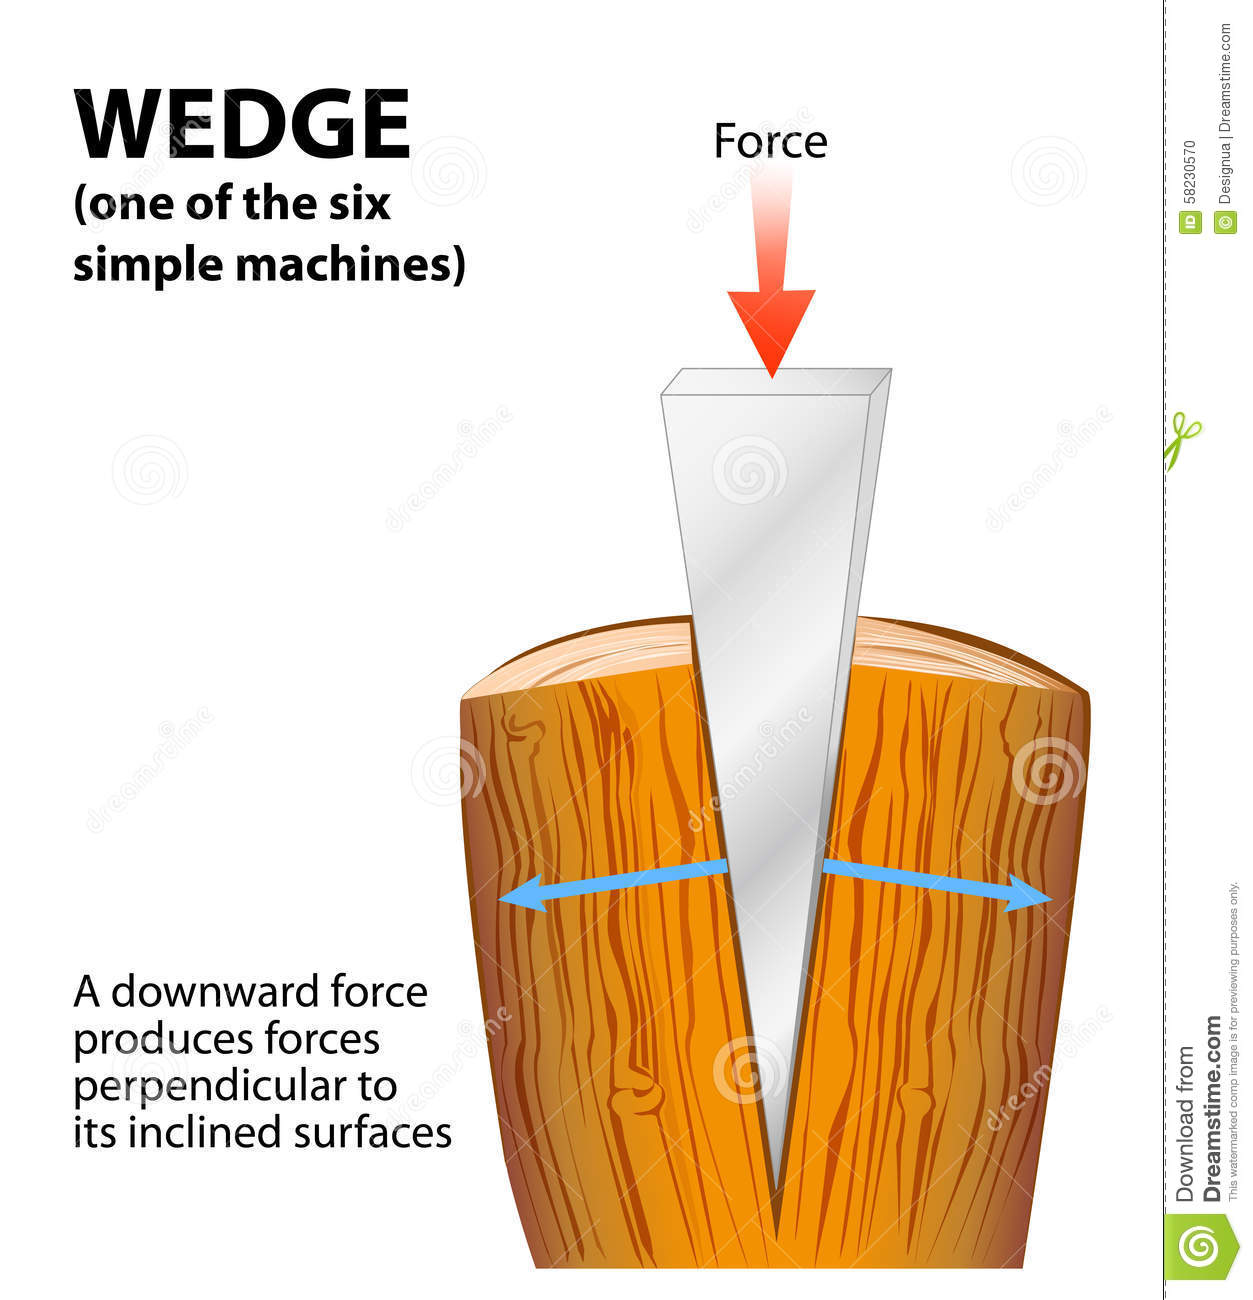 wedge-simple-machine-cross-section-splitting-its-length-oriented-vertically-wedges-used-to-split-things-58230570